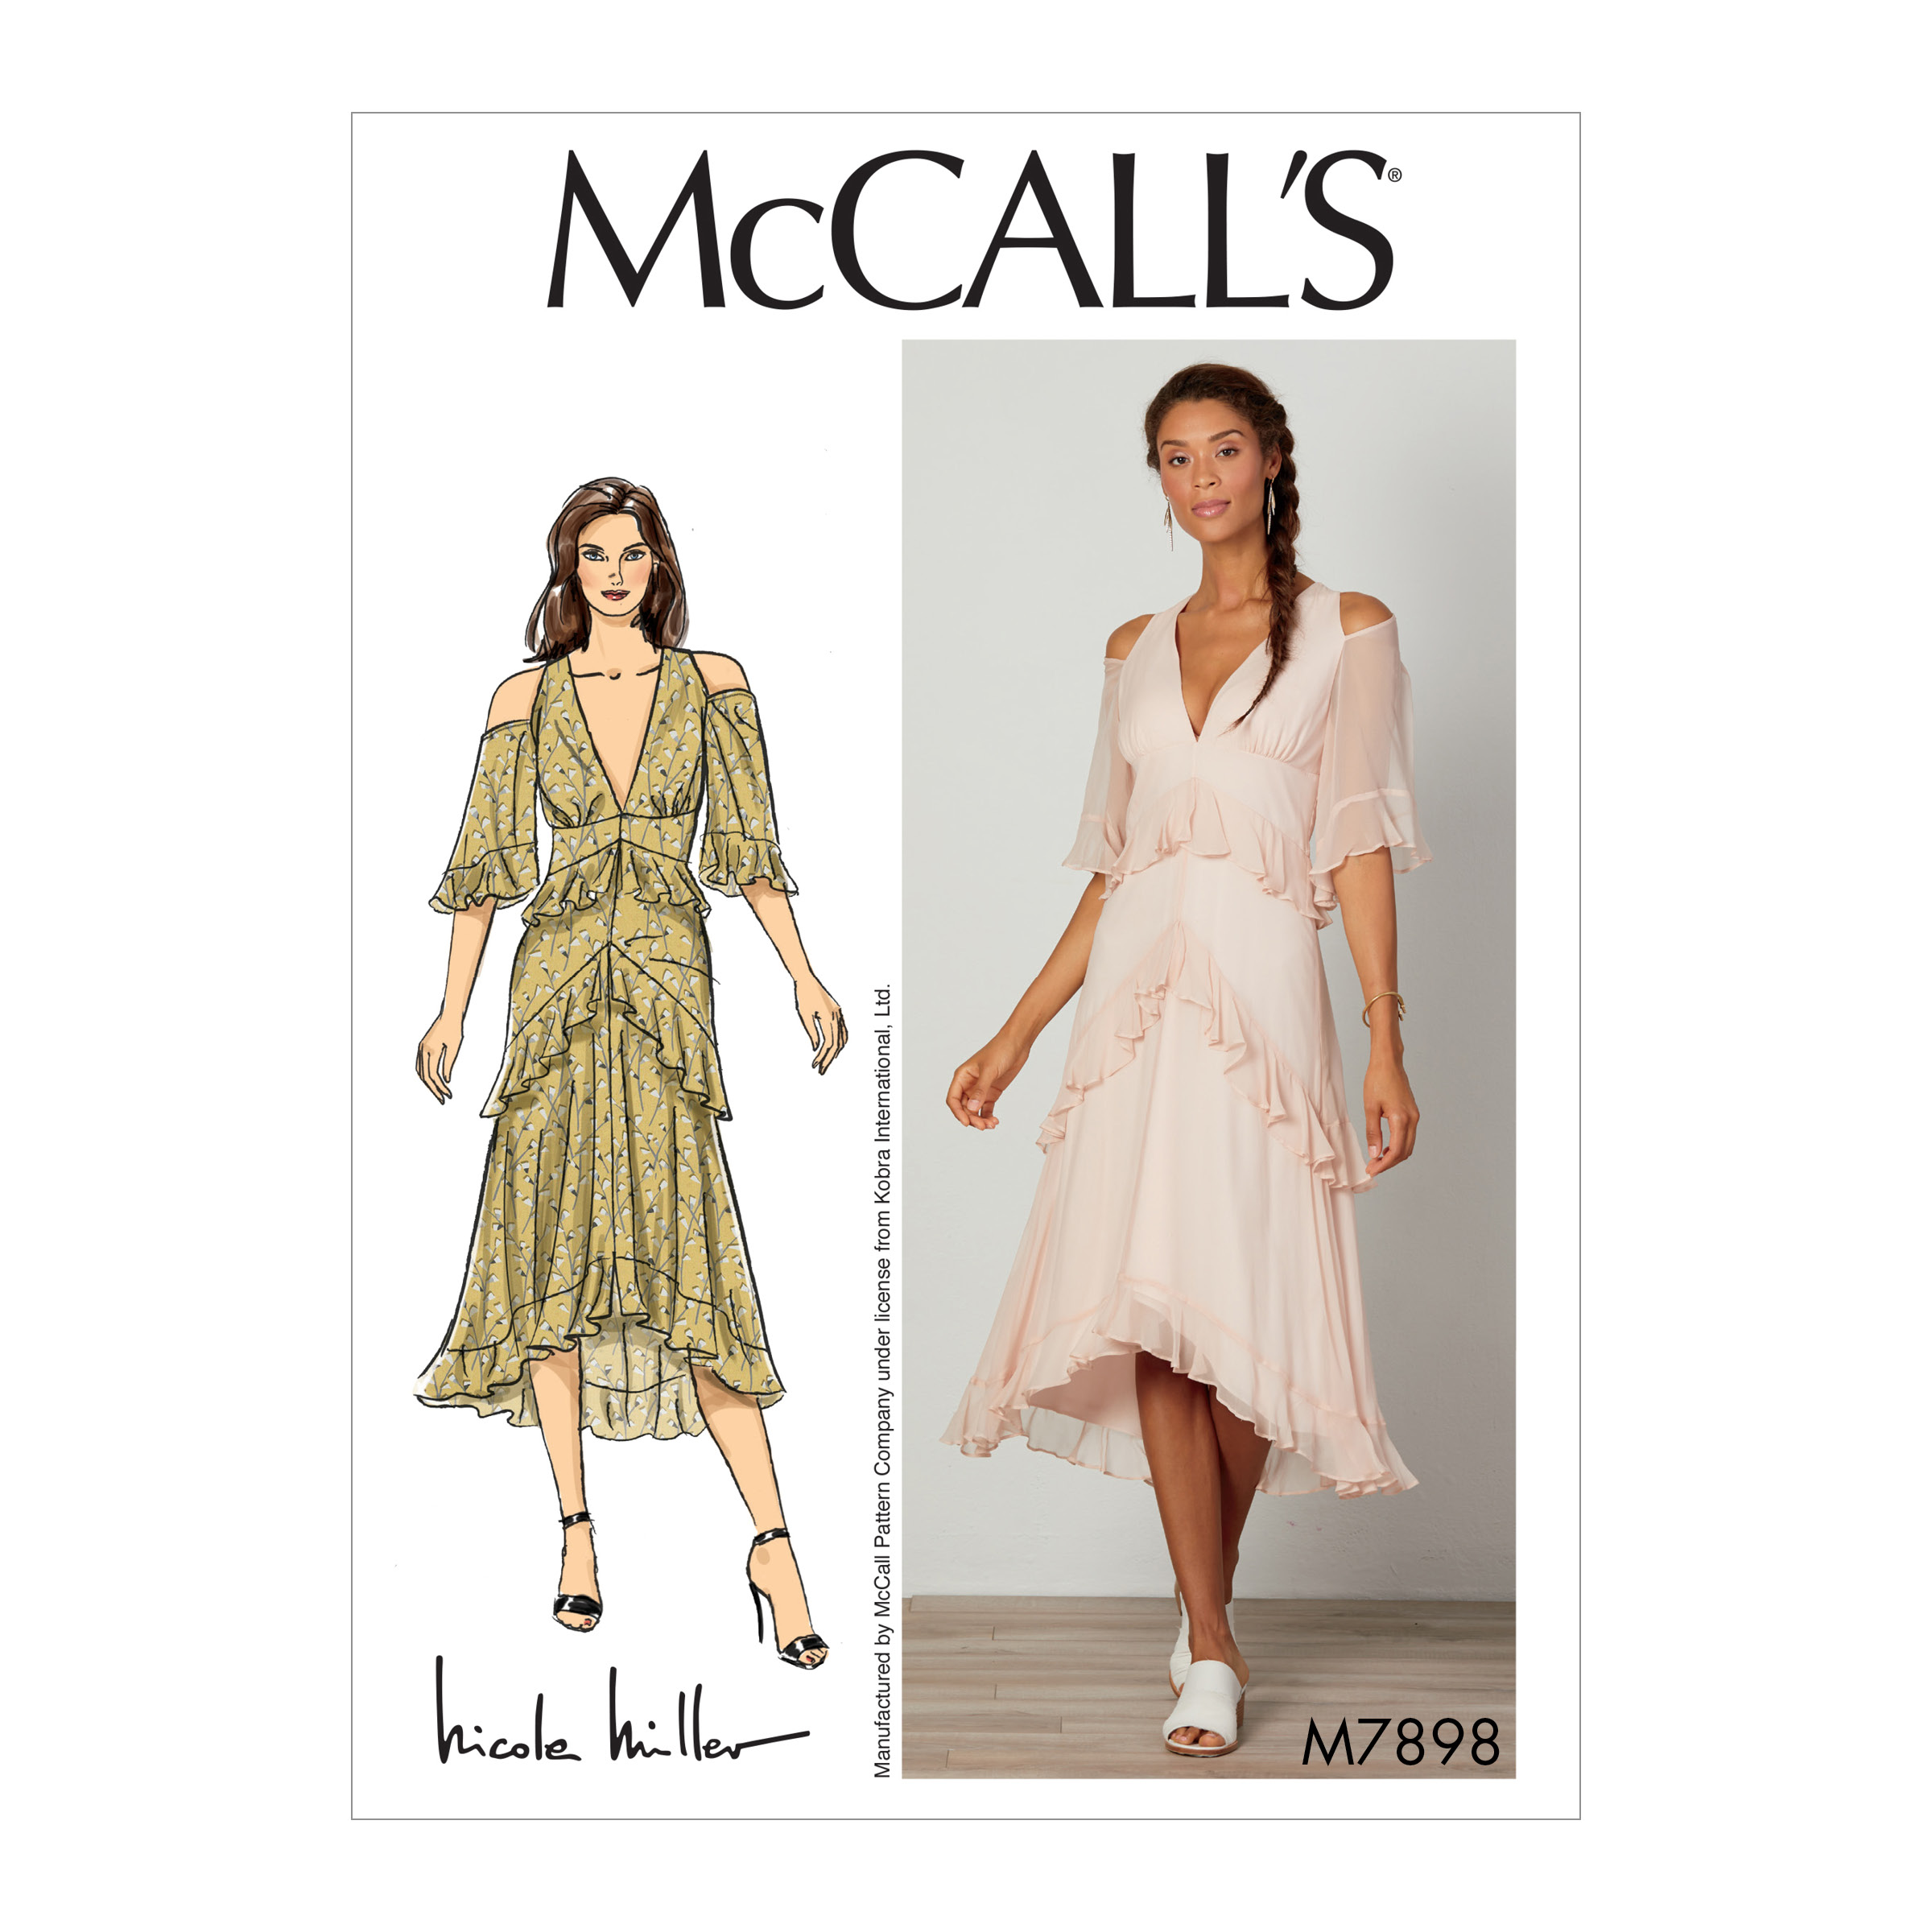 https://images.patternreview.com/sewing/patterns/mccall/2018/7898/7898.jpg